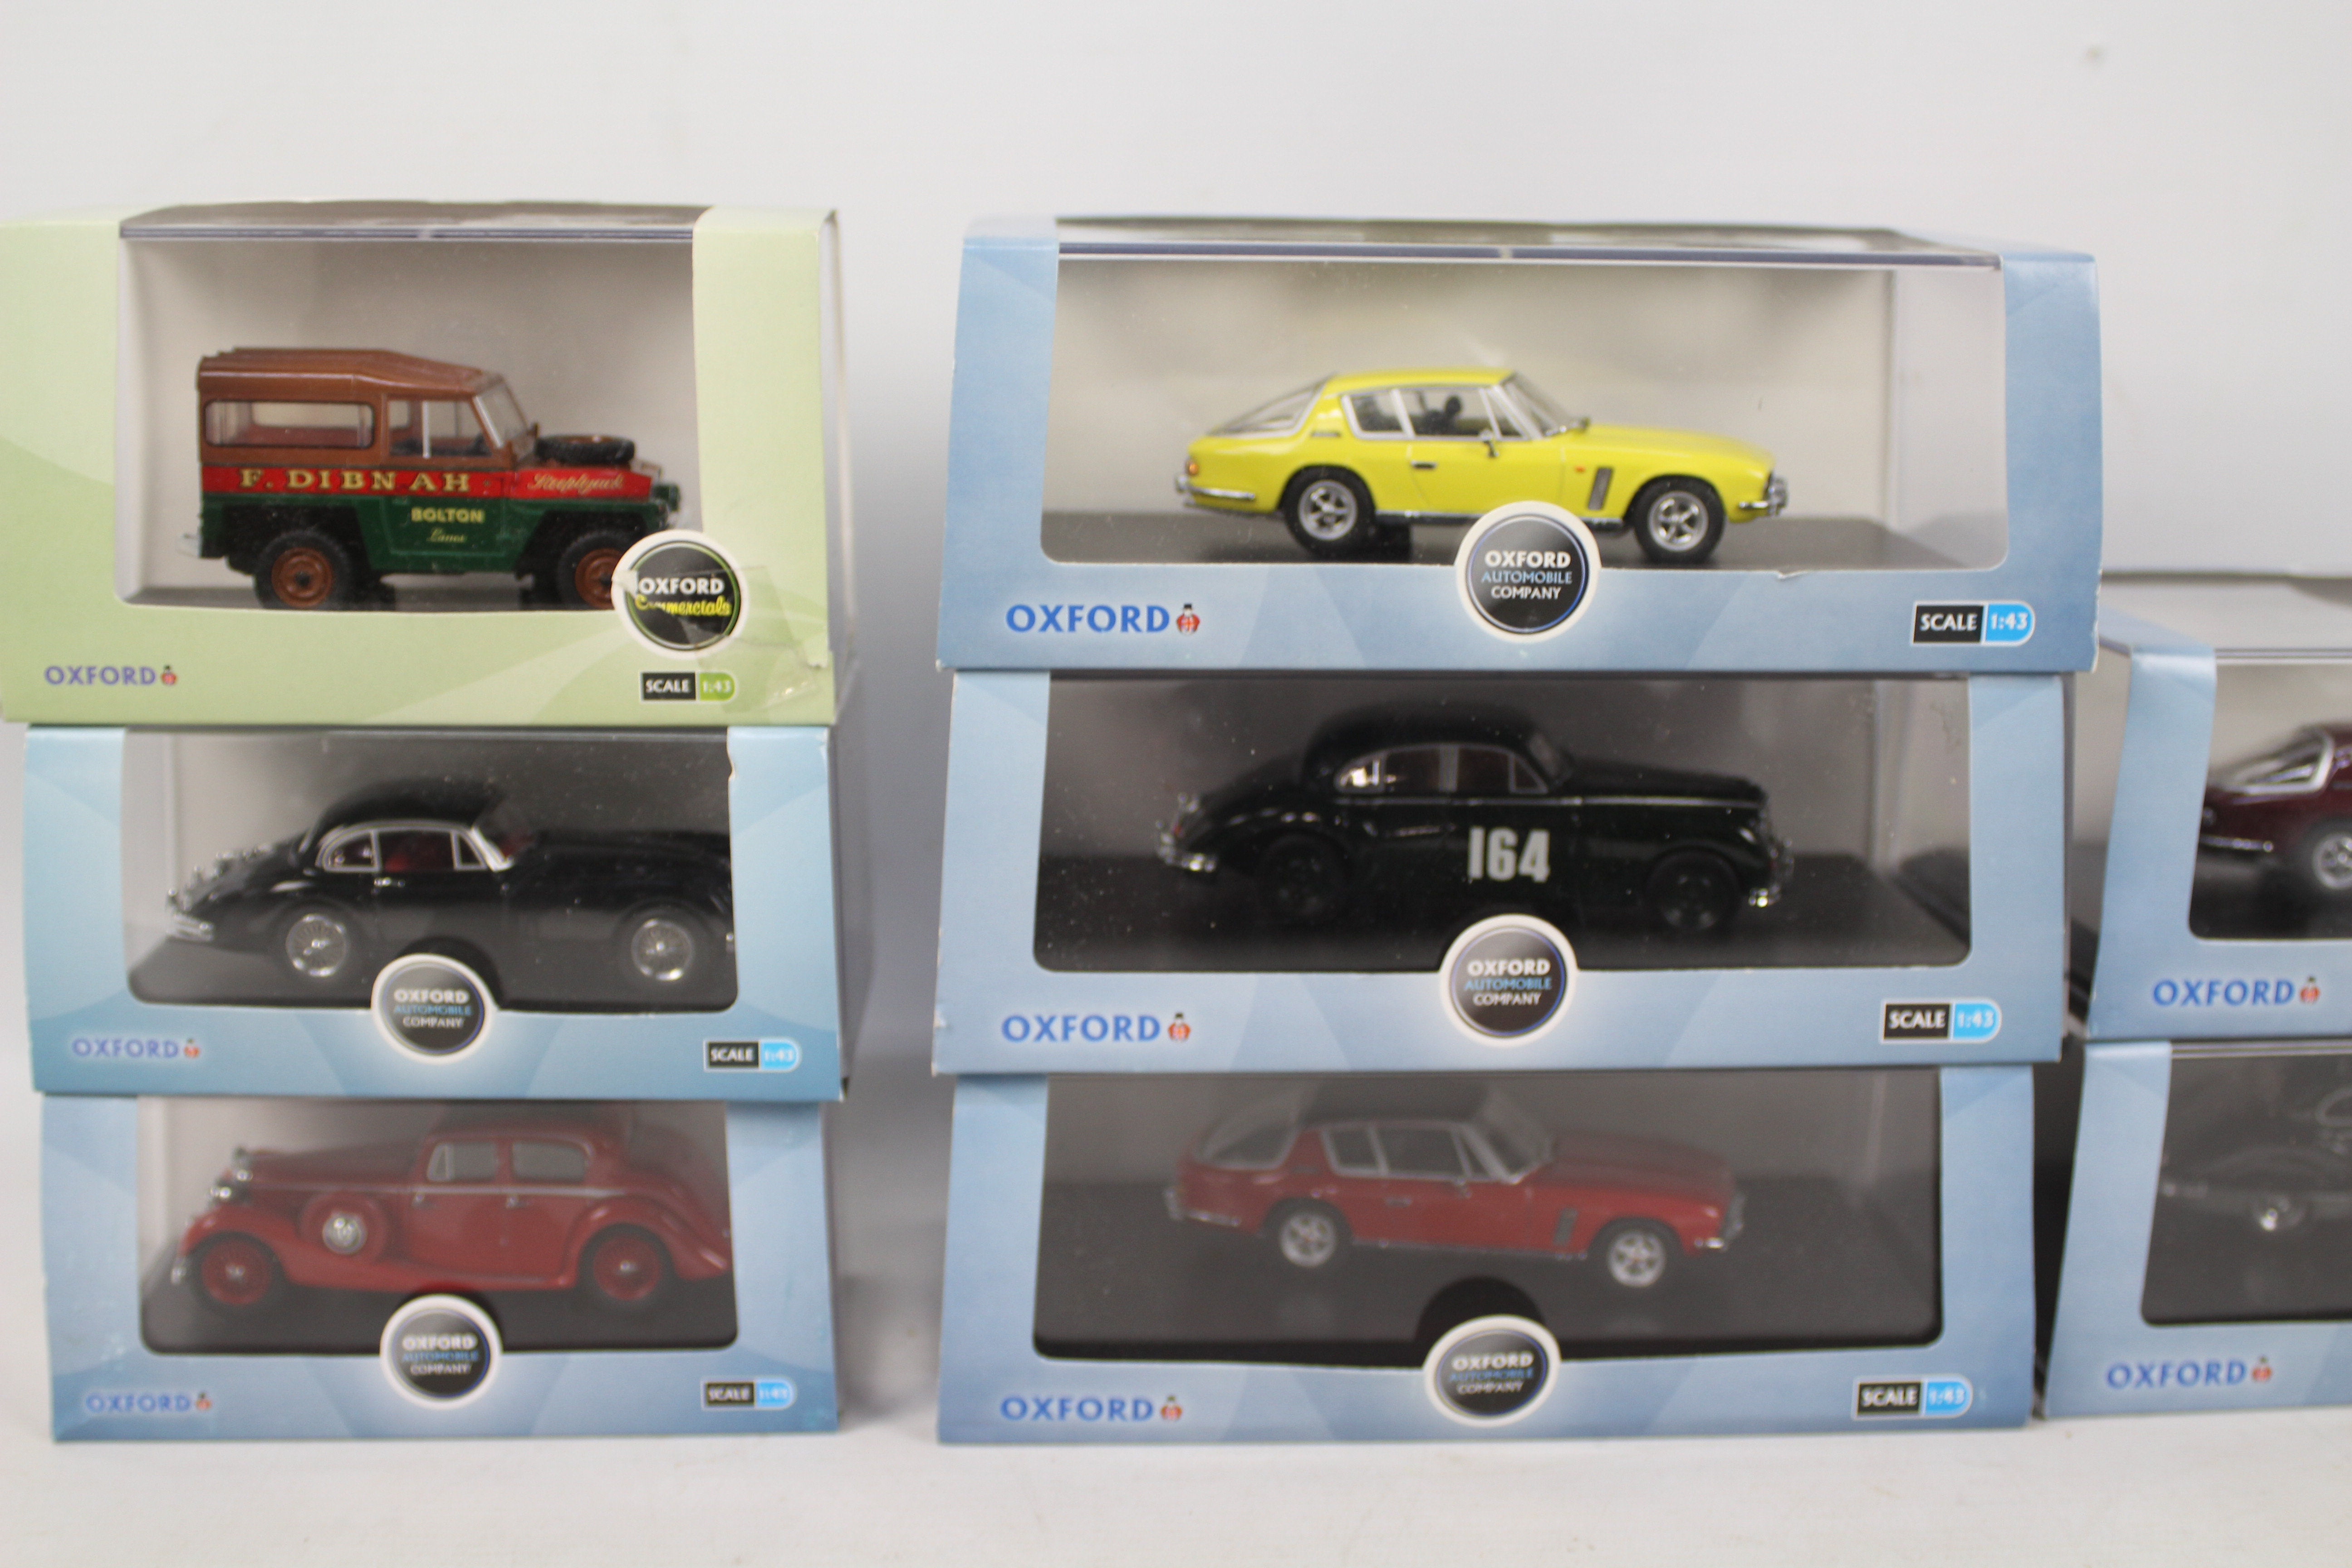 Oxford Diecast - Eight boxed 1:43 scale diecast model vehic les from Oxford Diecast. - Image 2 of 3